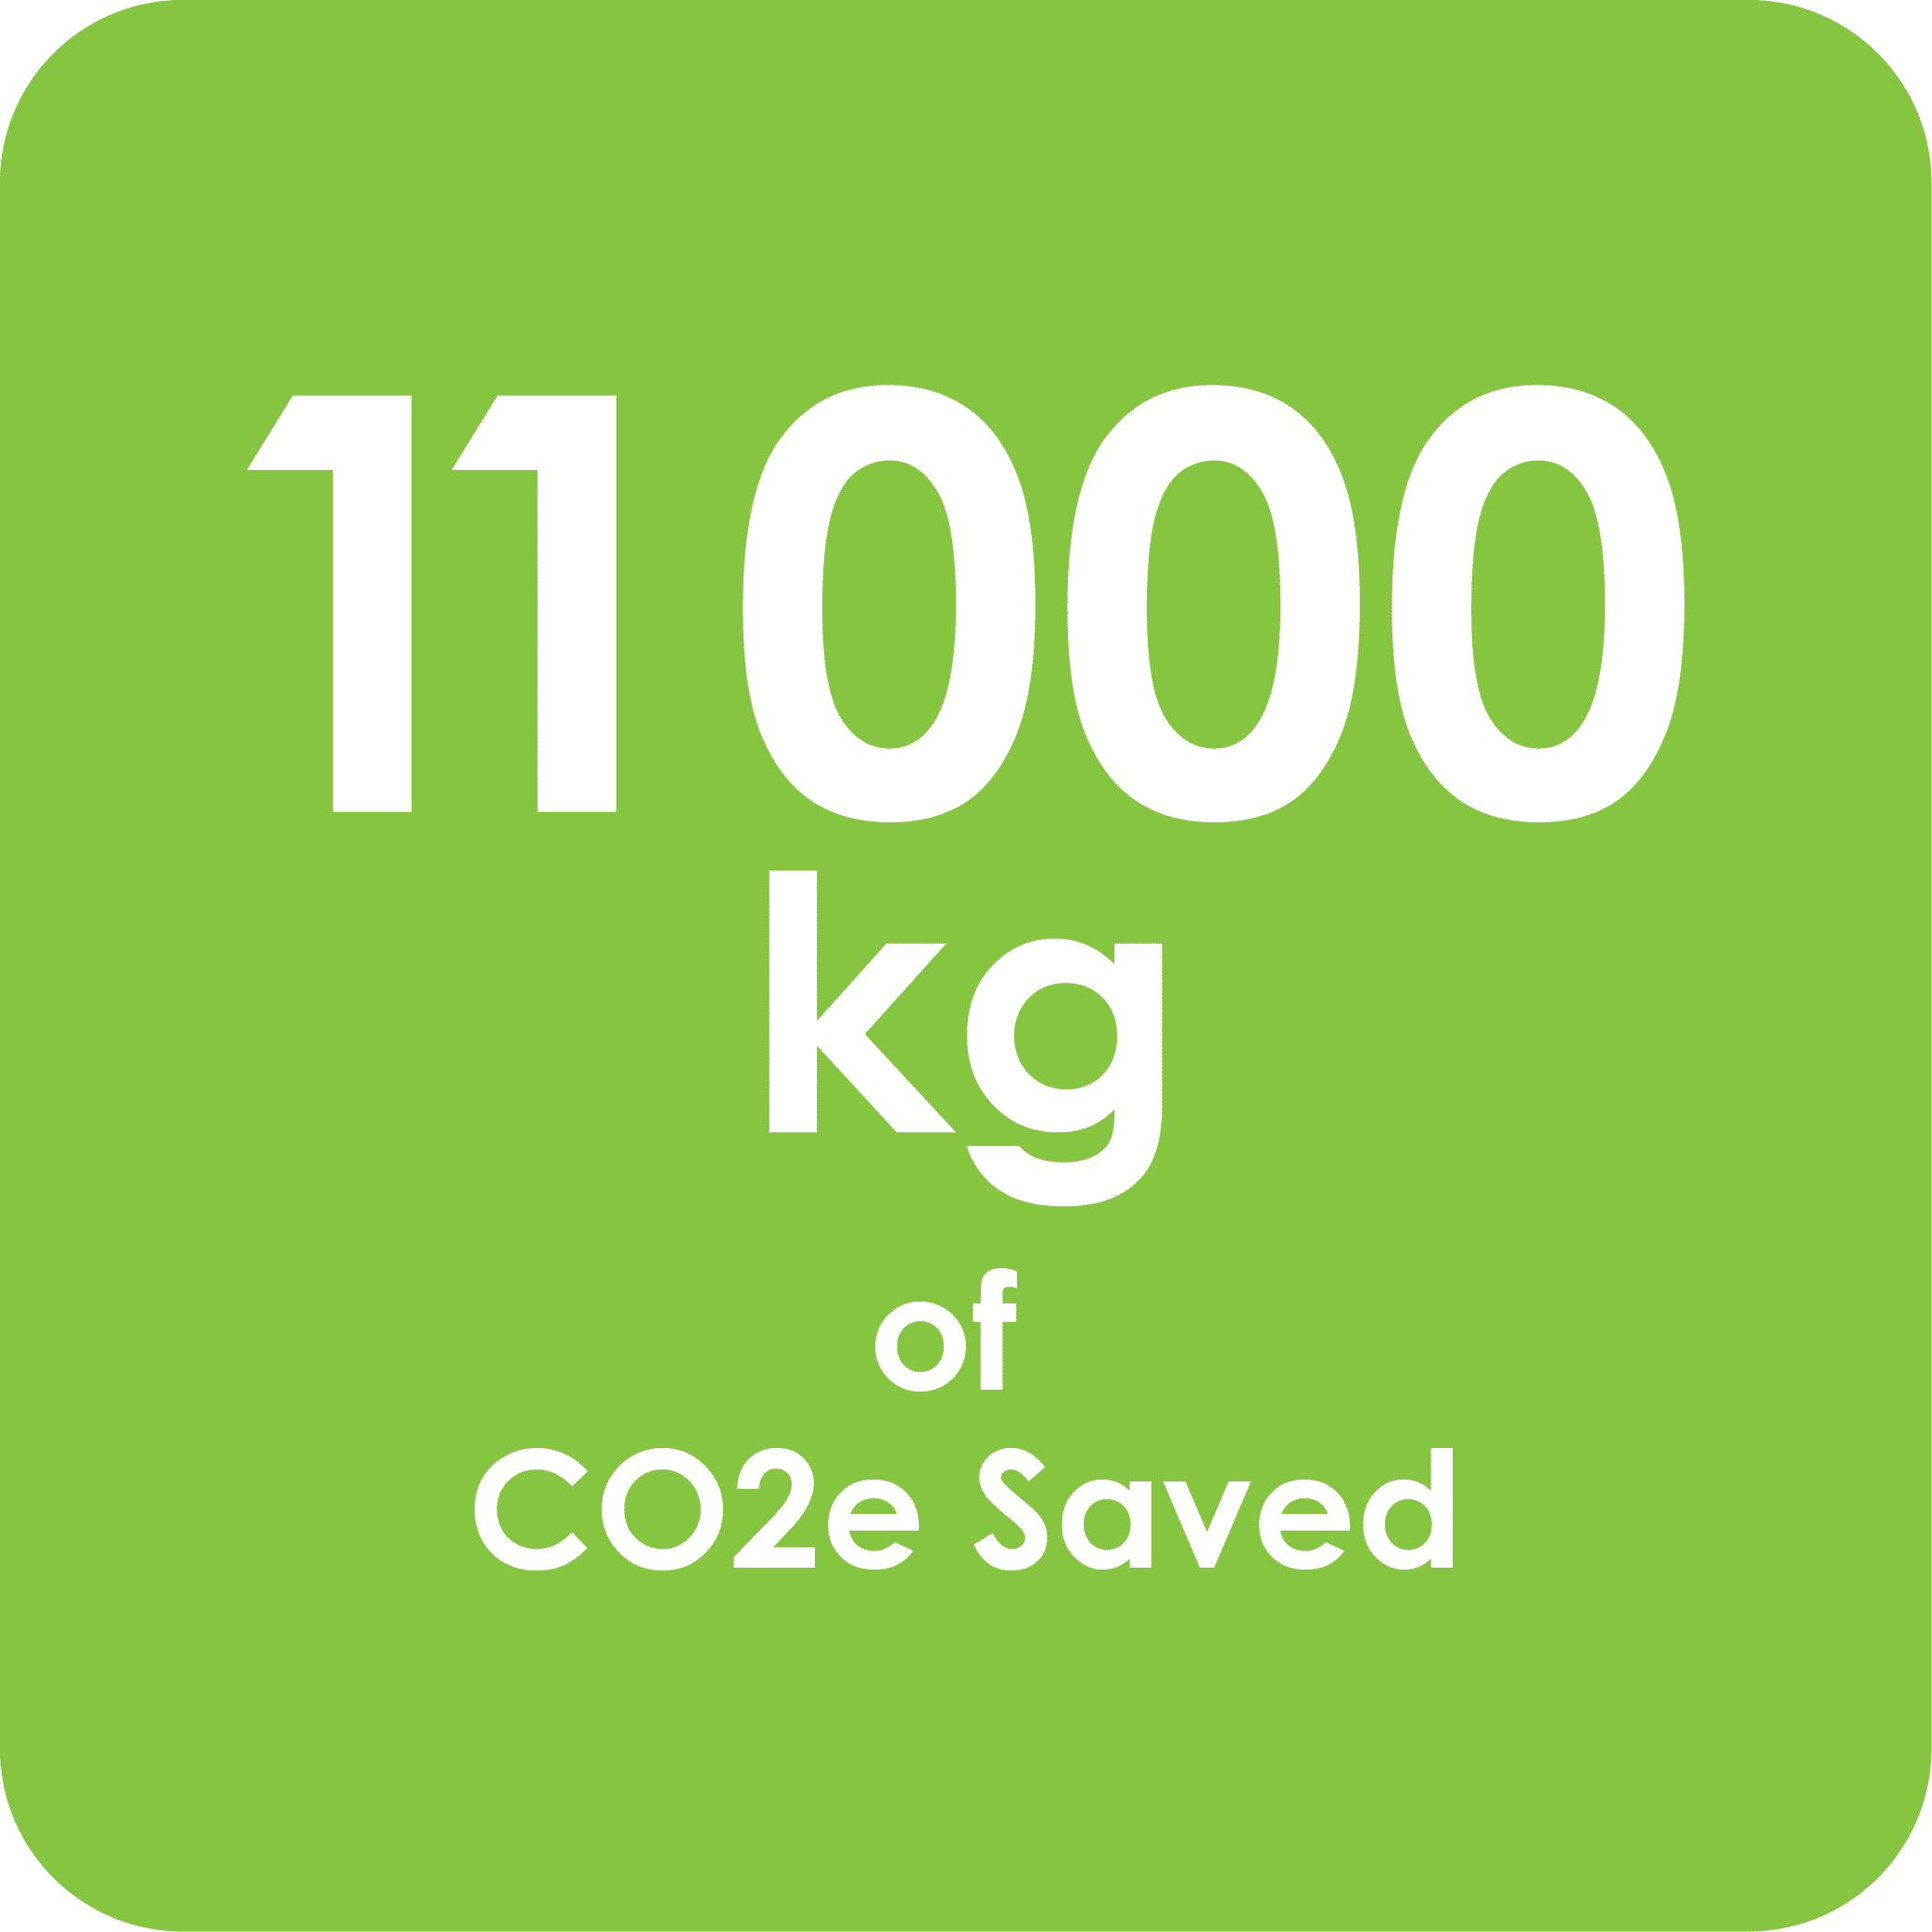 11000 kg of CO2e Saved